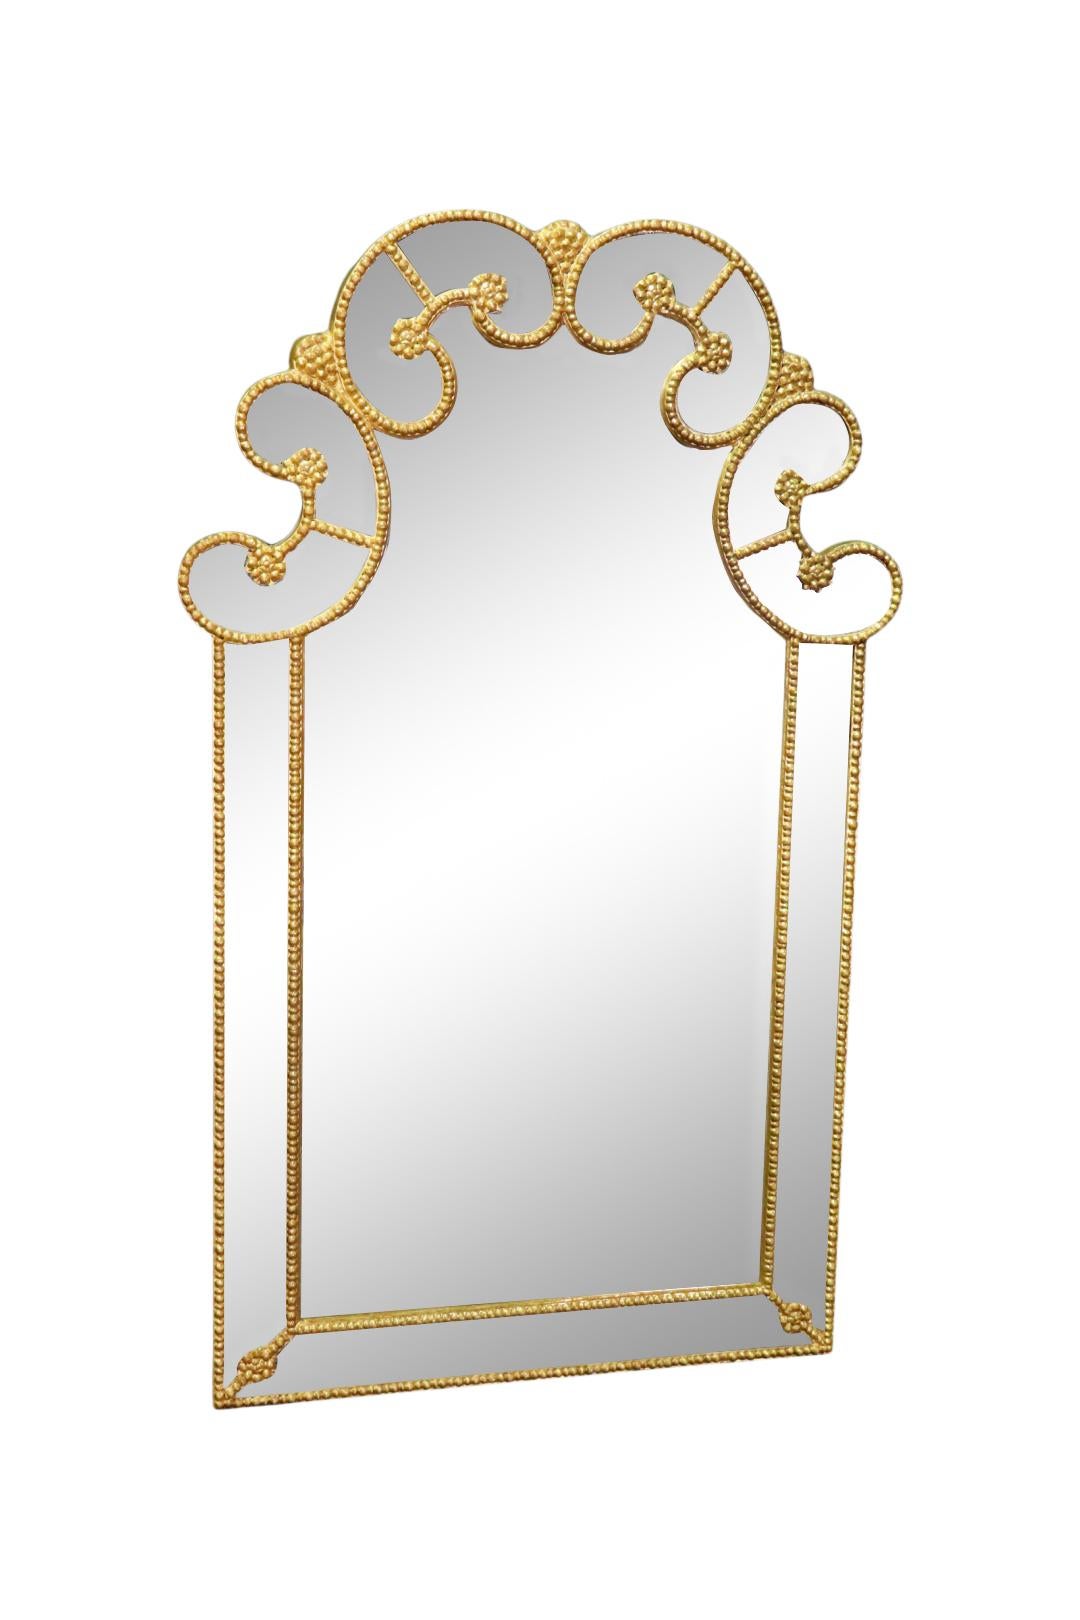 Superb Gilded Frame Hollywood Regency Wall Mirror Draper Era  In Good Condition For Sale In Swedesboro, NJ